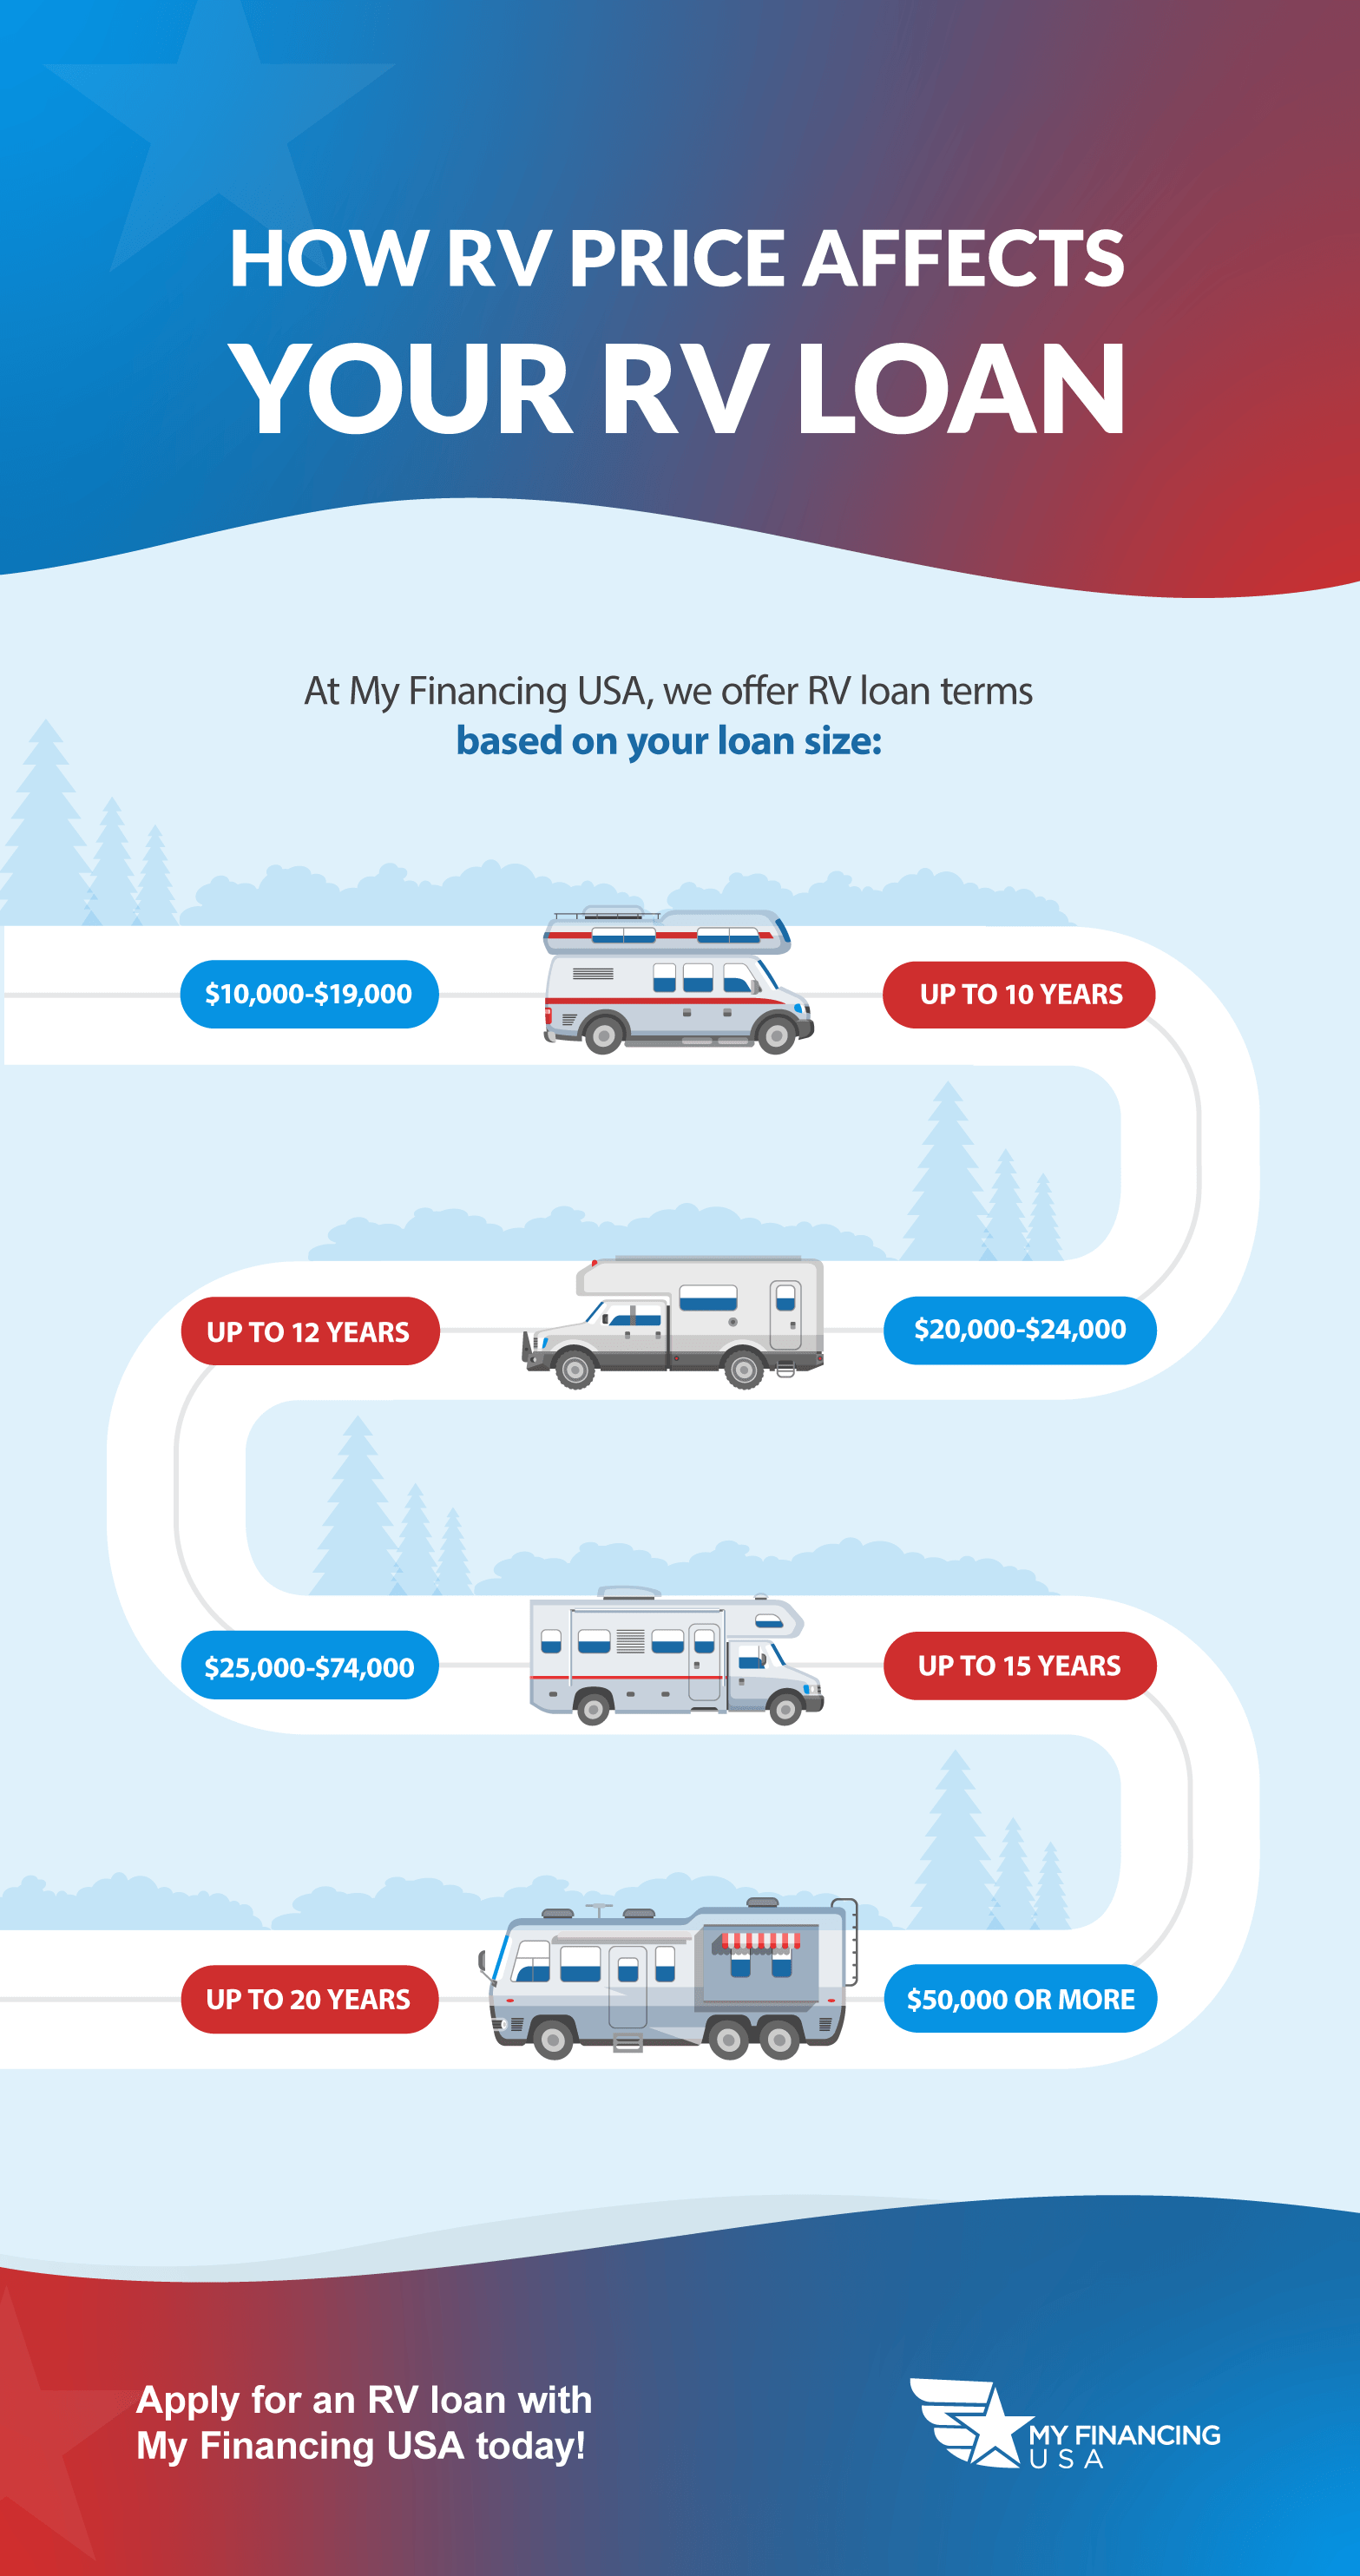 How RV Price Affects Your RV Loan. At My Financing USA, we offer RV loan terms based on your loan size.